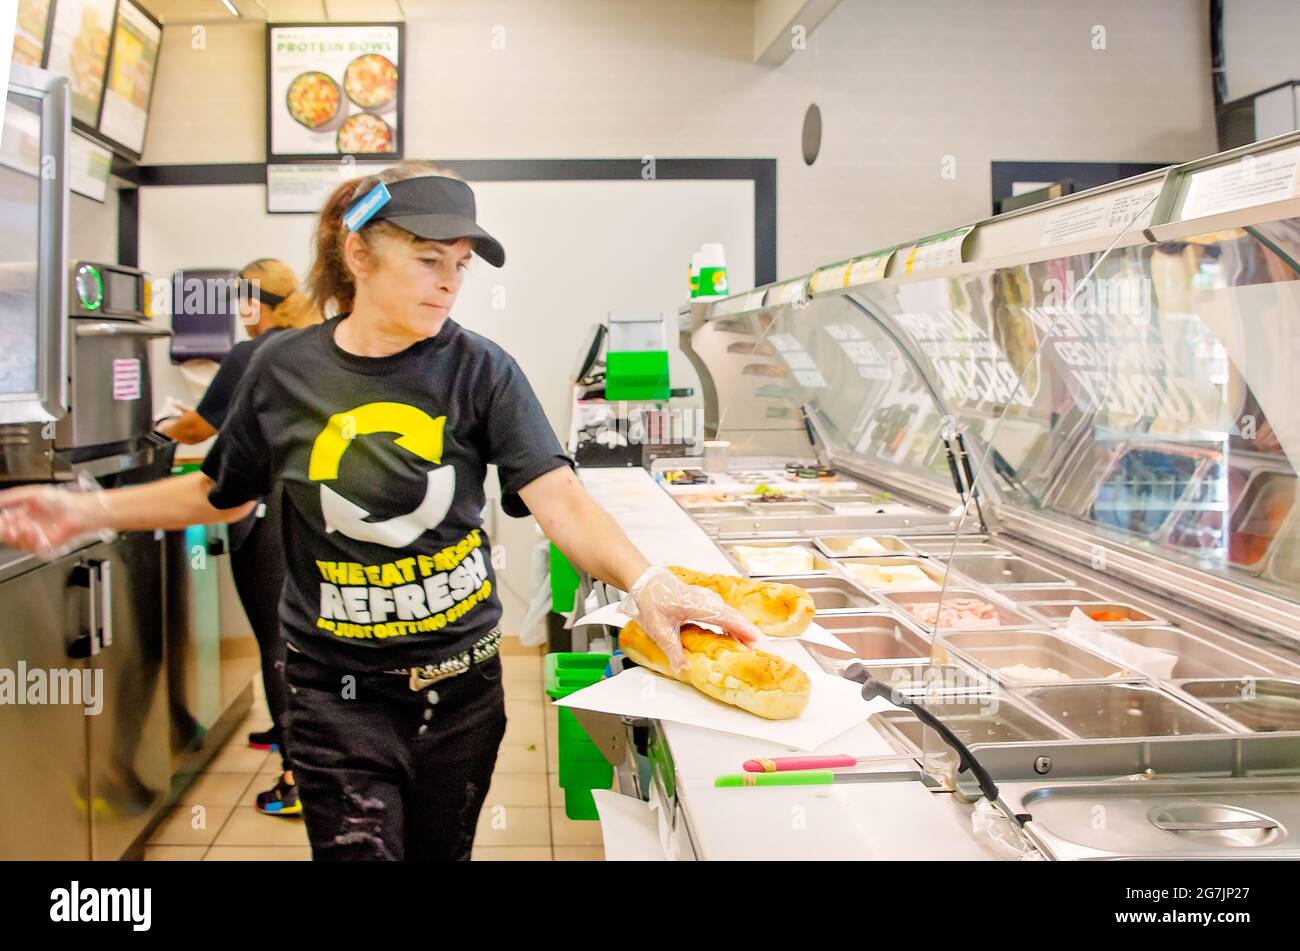 A Subway sandwich artist prepares sandwiches on the first day of the  “Eat Fresh Refresh” campaign, July 13, 2021, in Bayou La Batre, Alabama. Stock Photo